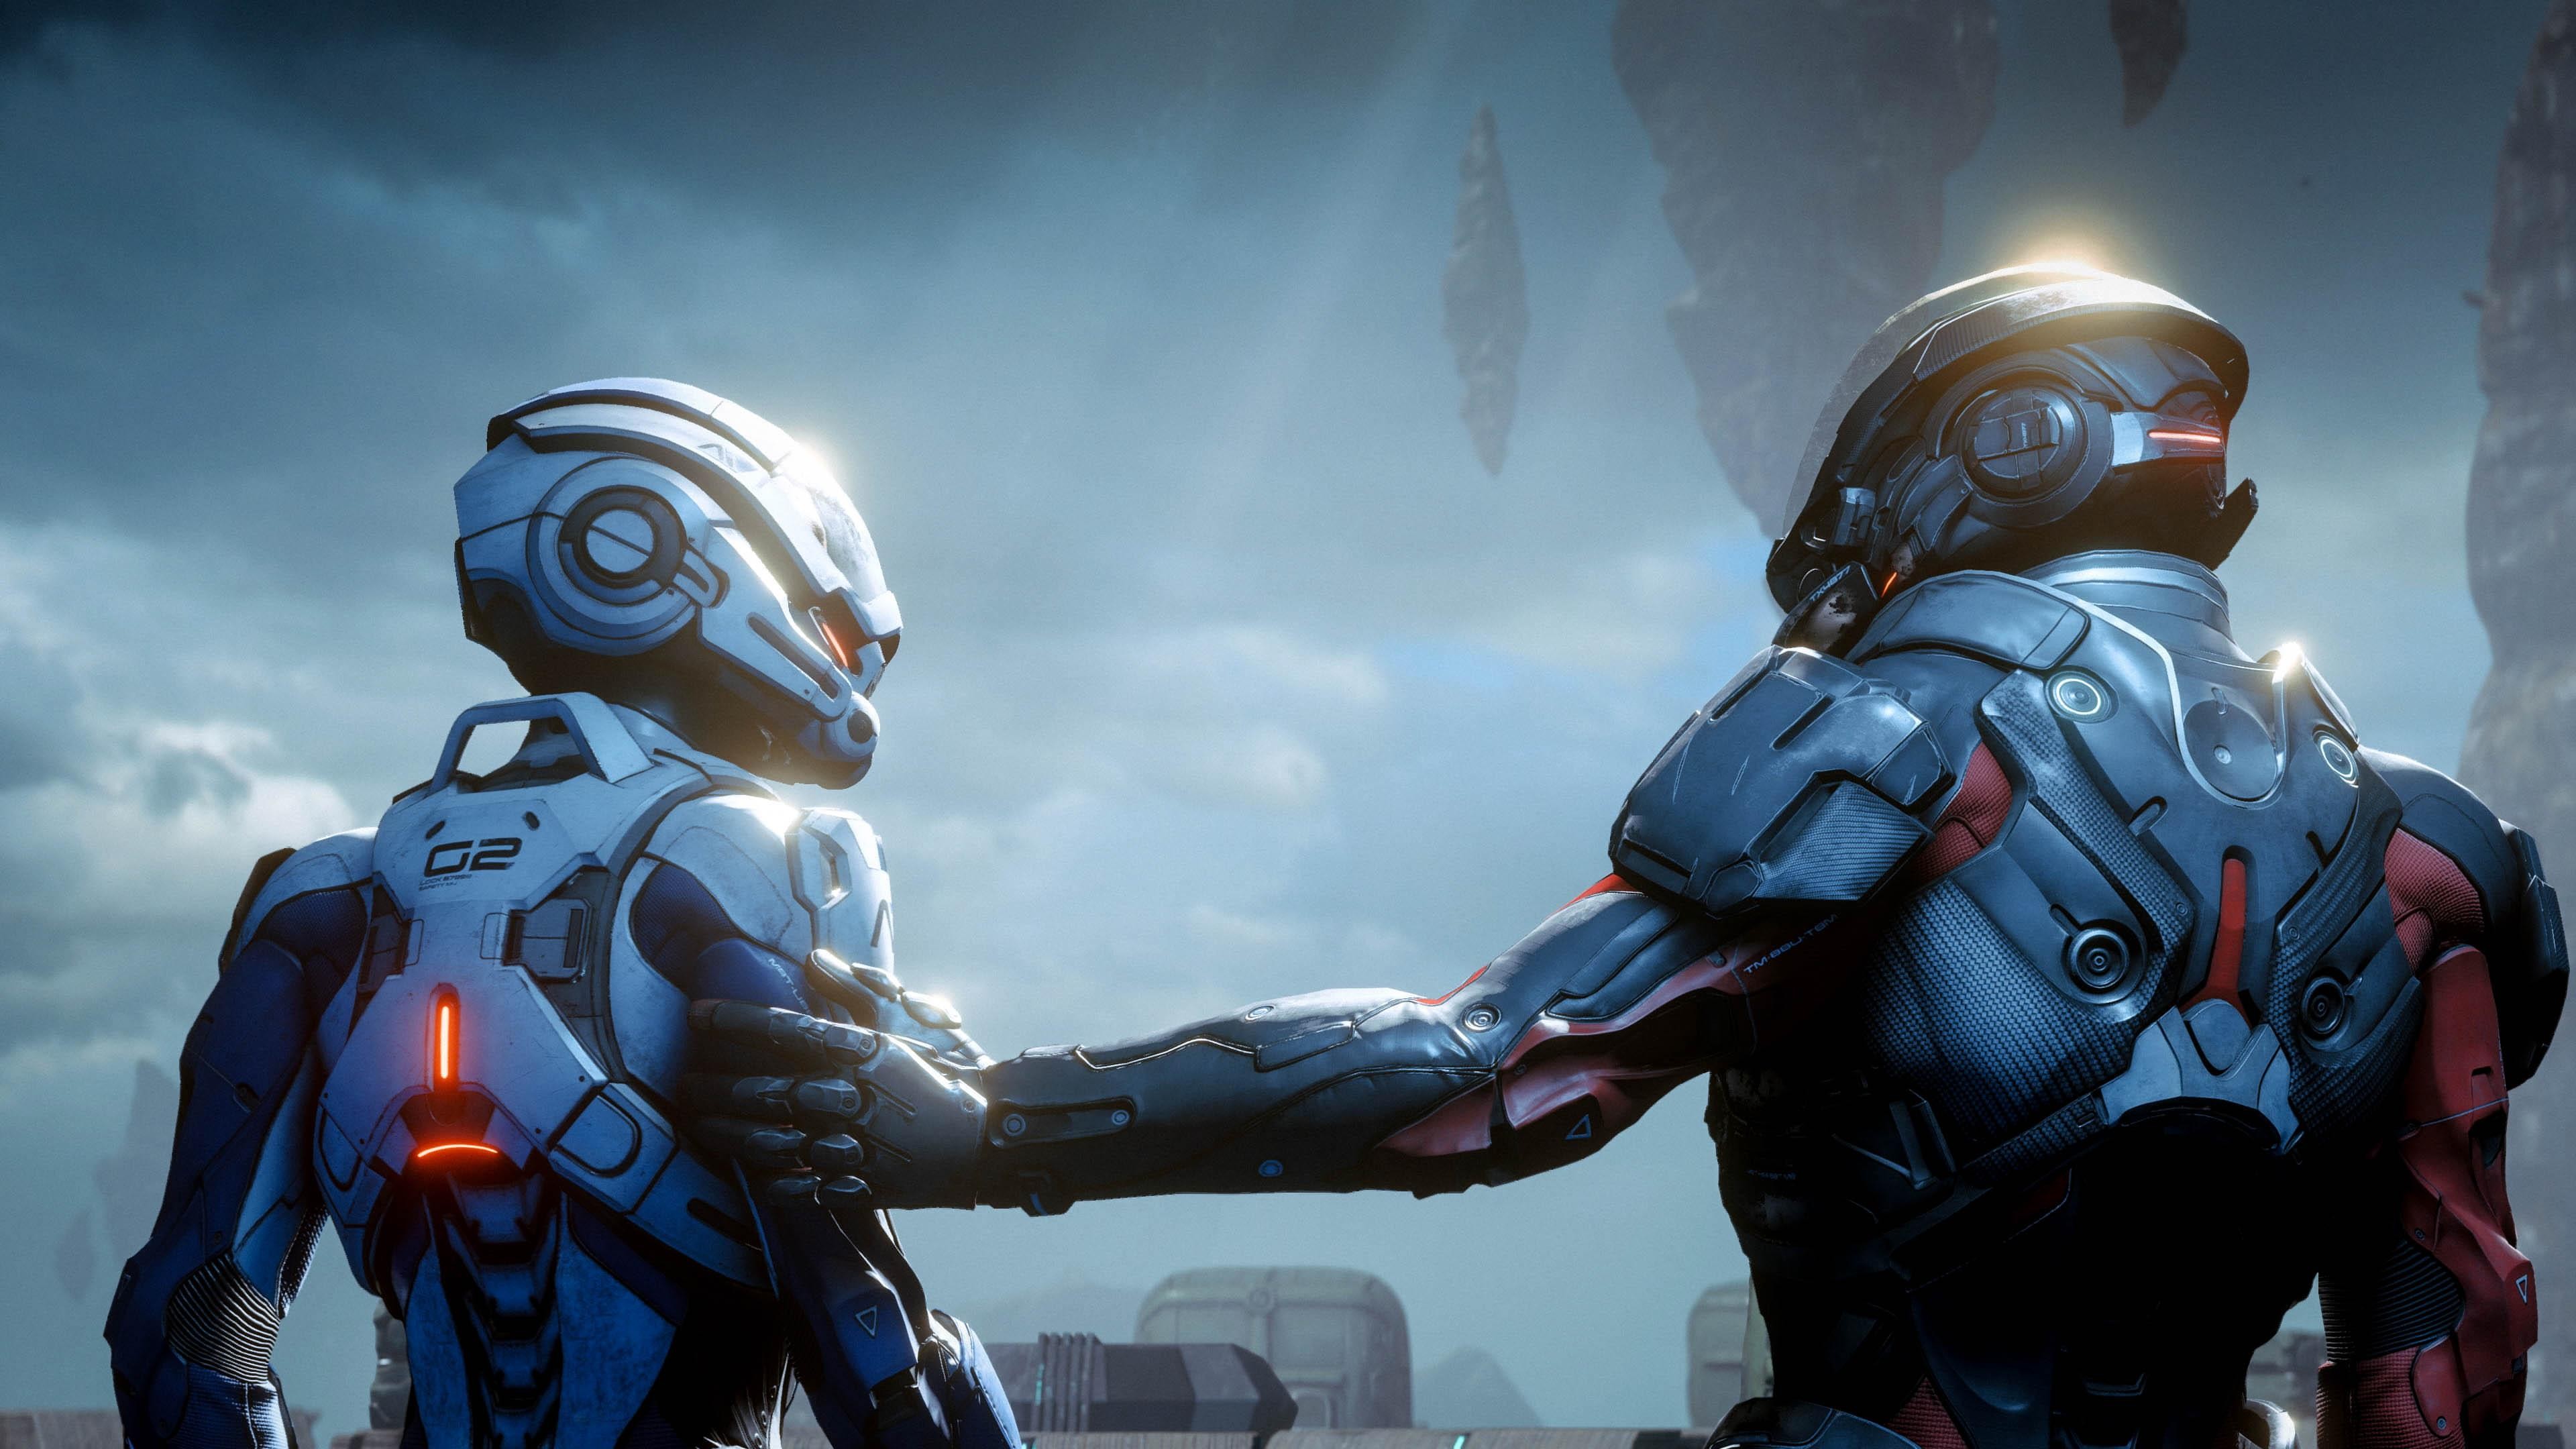 Mass Effect Andromeda Backgrounds